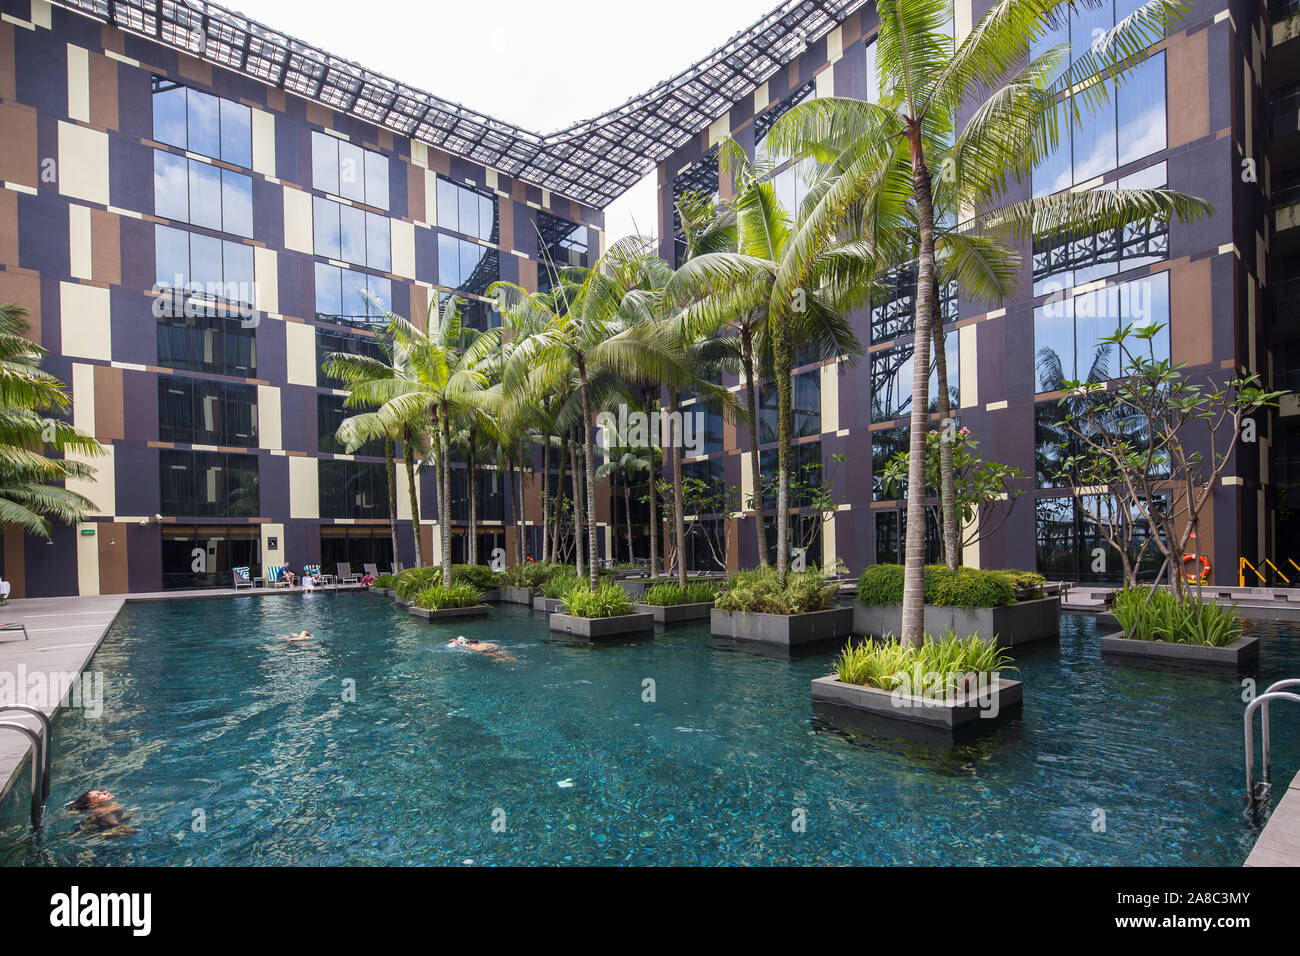 Common area of Crowne Plaza hotel premises in Changi Airport T3, Singapore Stock Photo